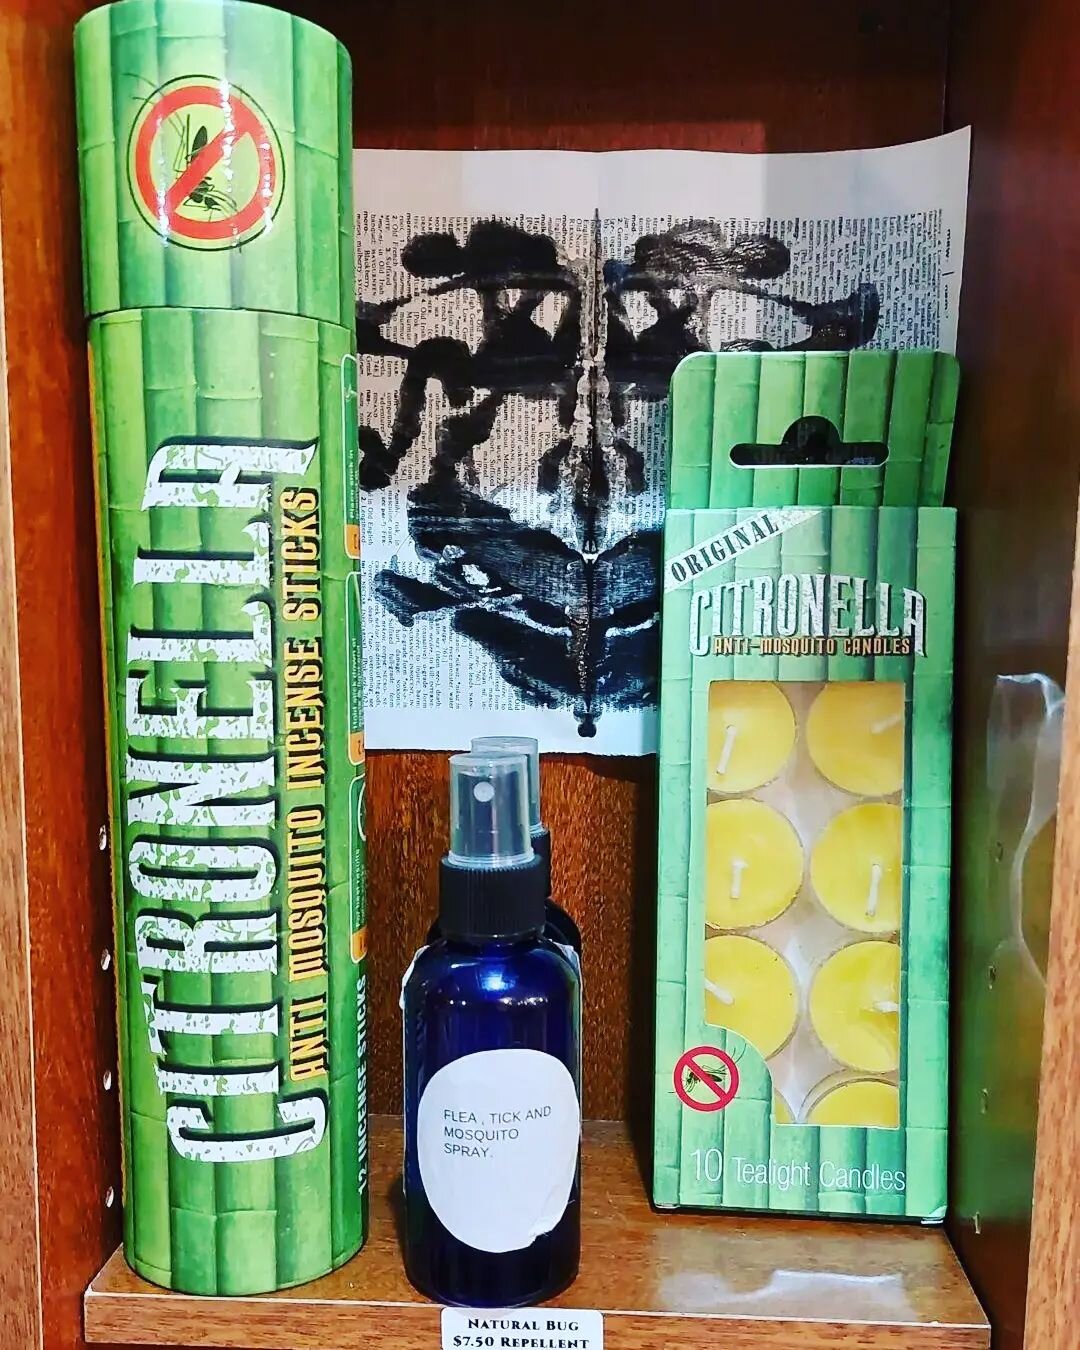 Keep the bugs at bay! We have natural bug repellent, Large Citronella incense sticks for the yard and tea light candles!